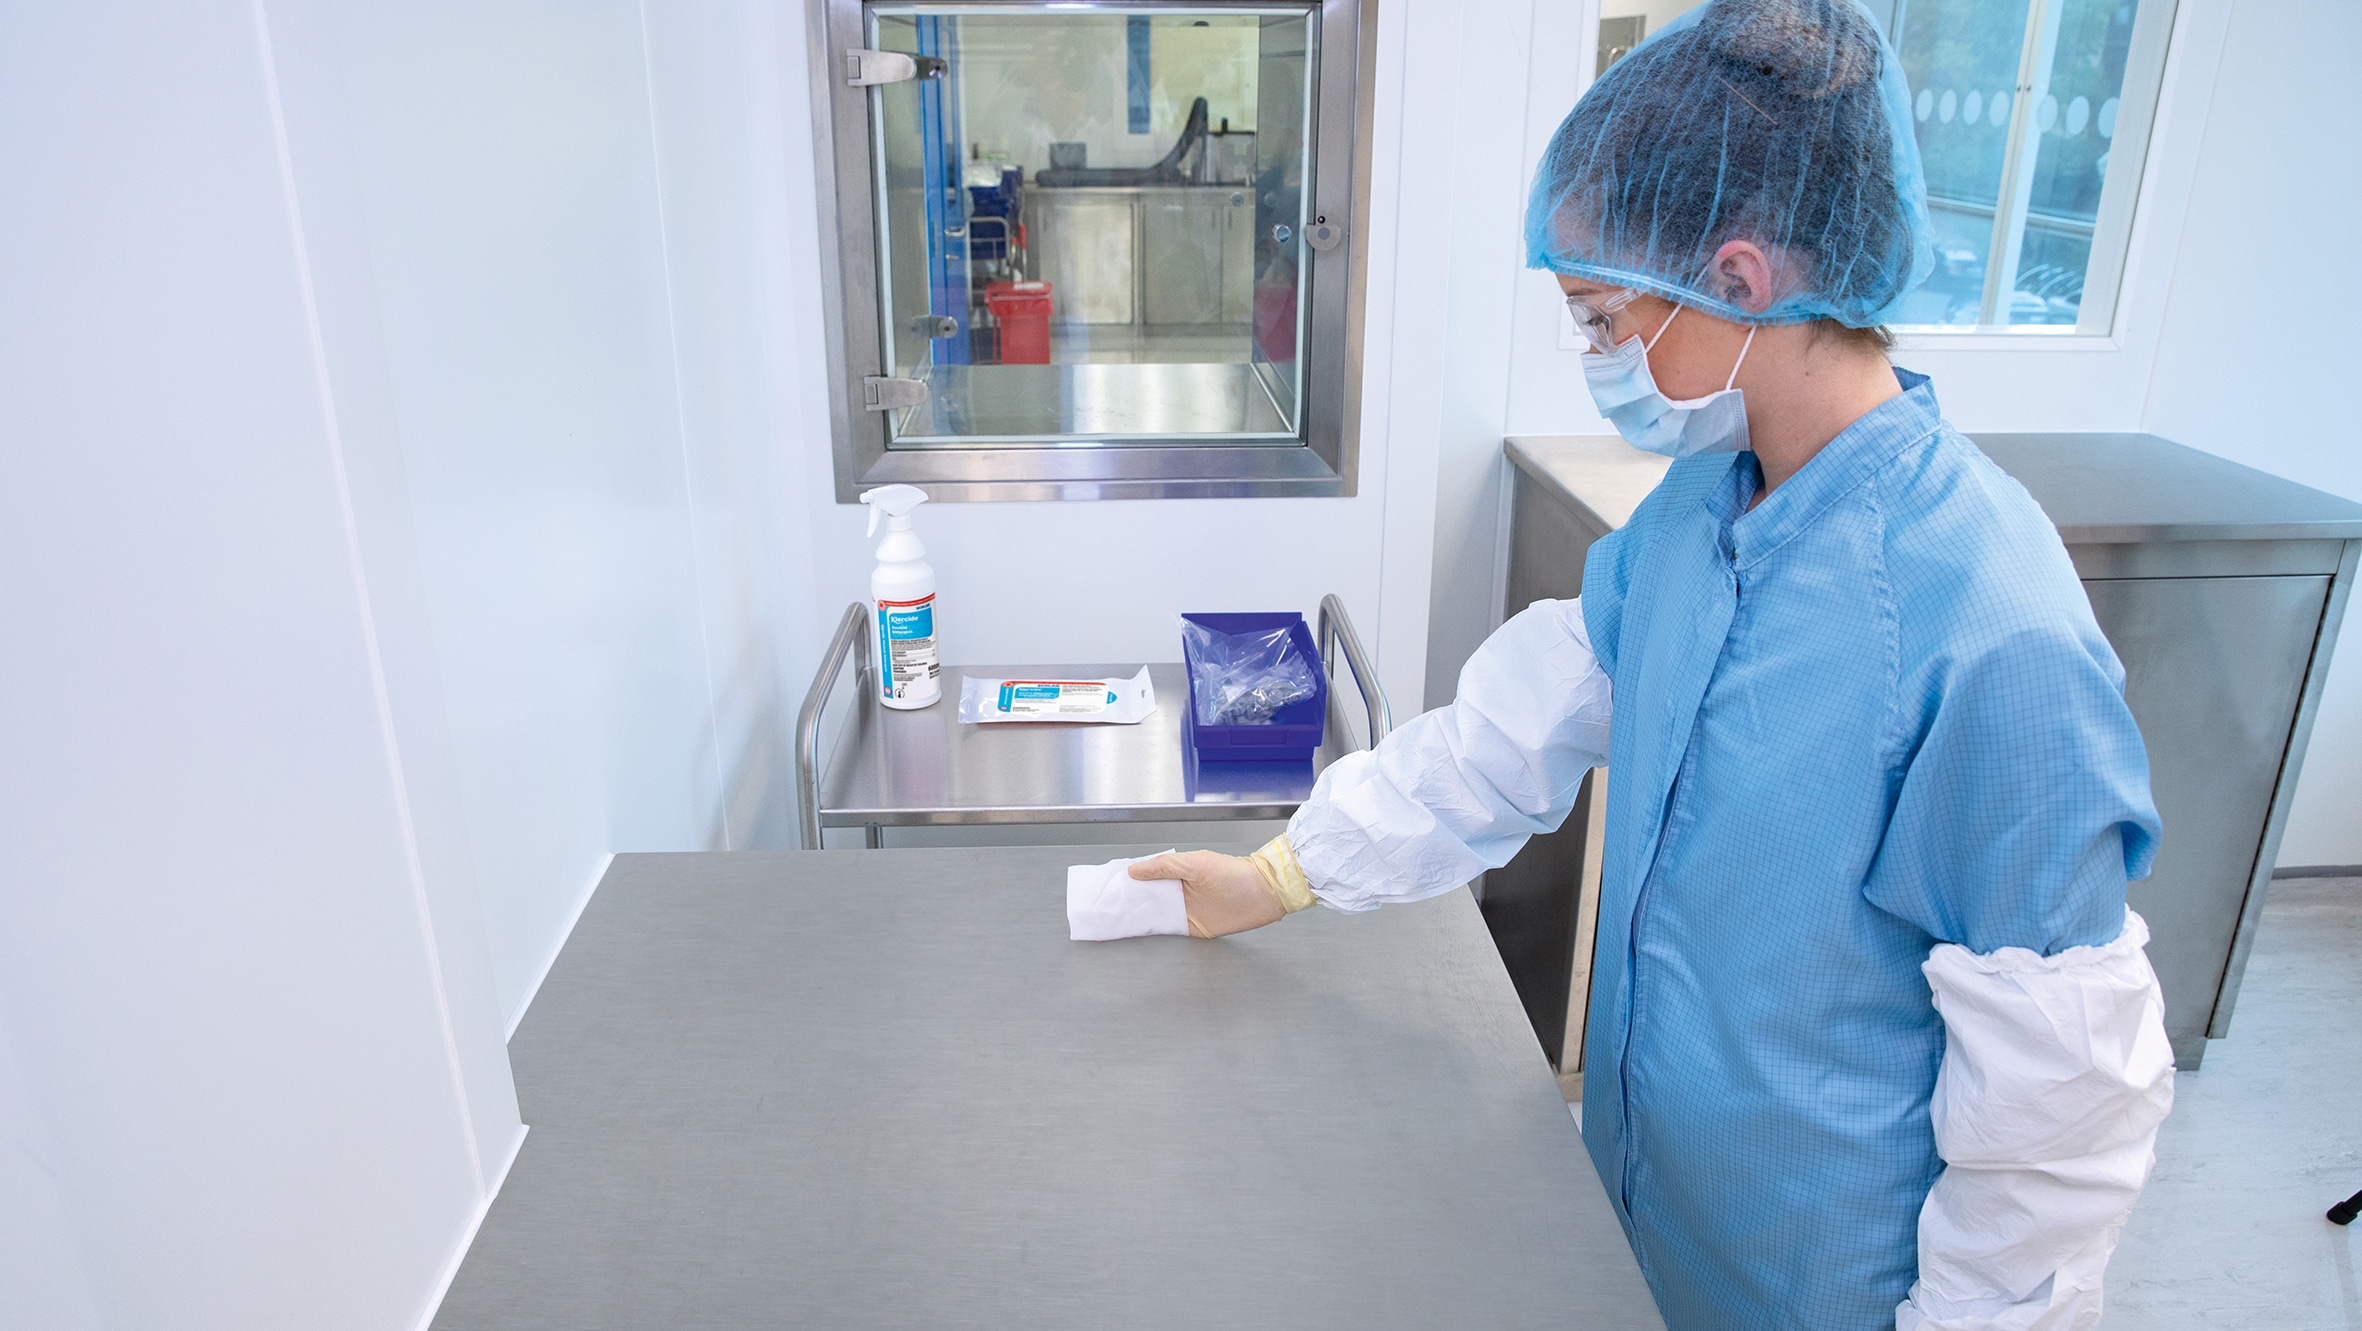 Technician using an Ecolab disinfectant in a cleanroom